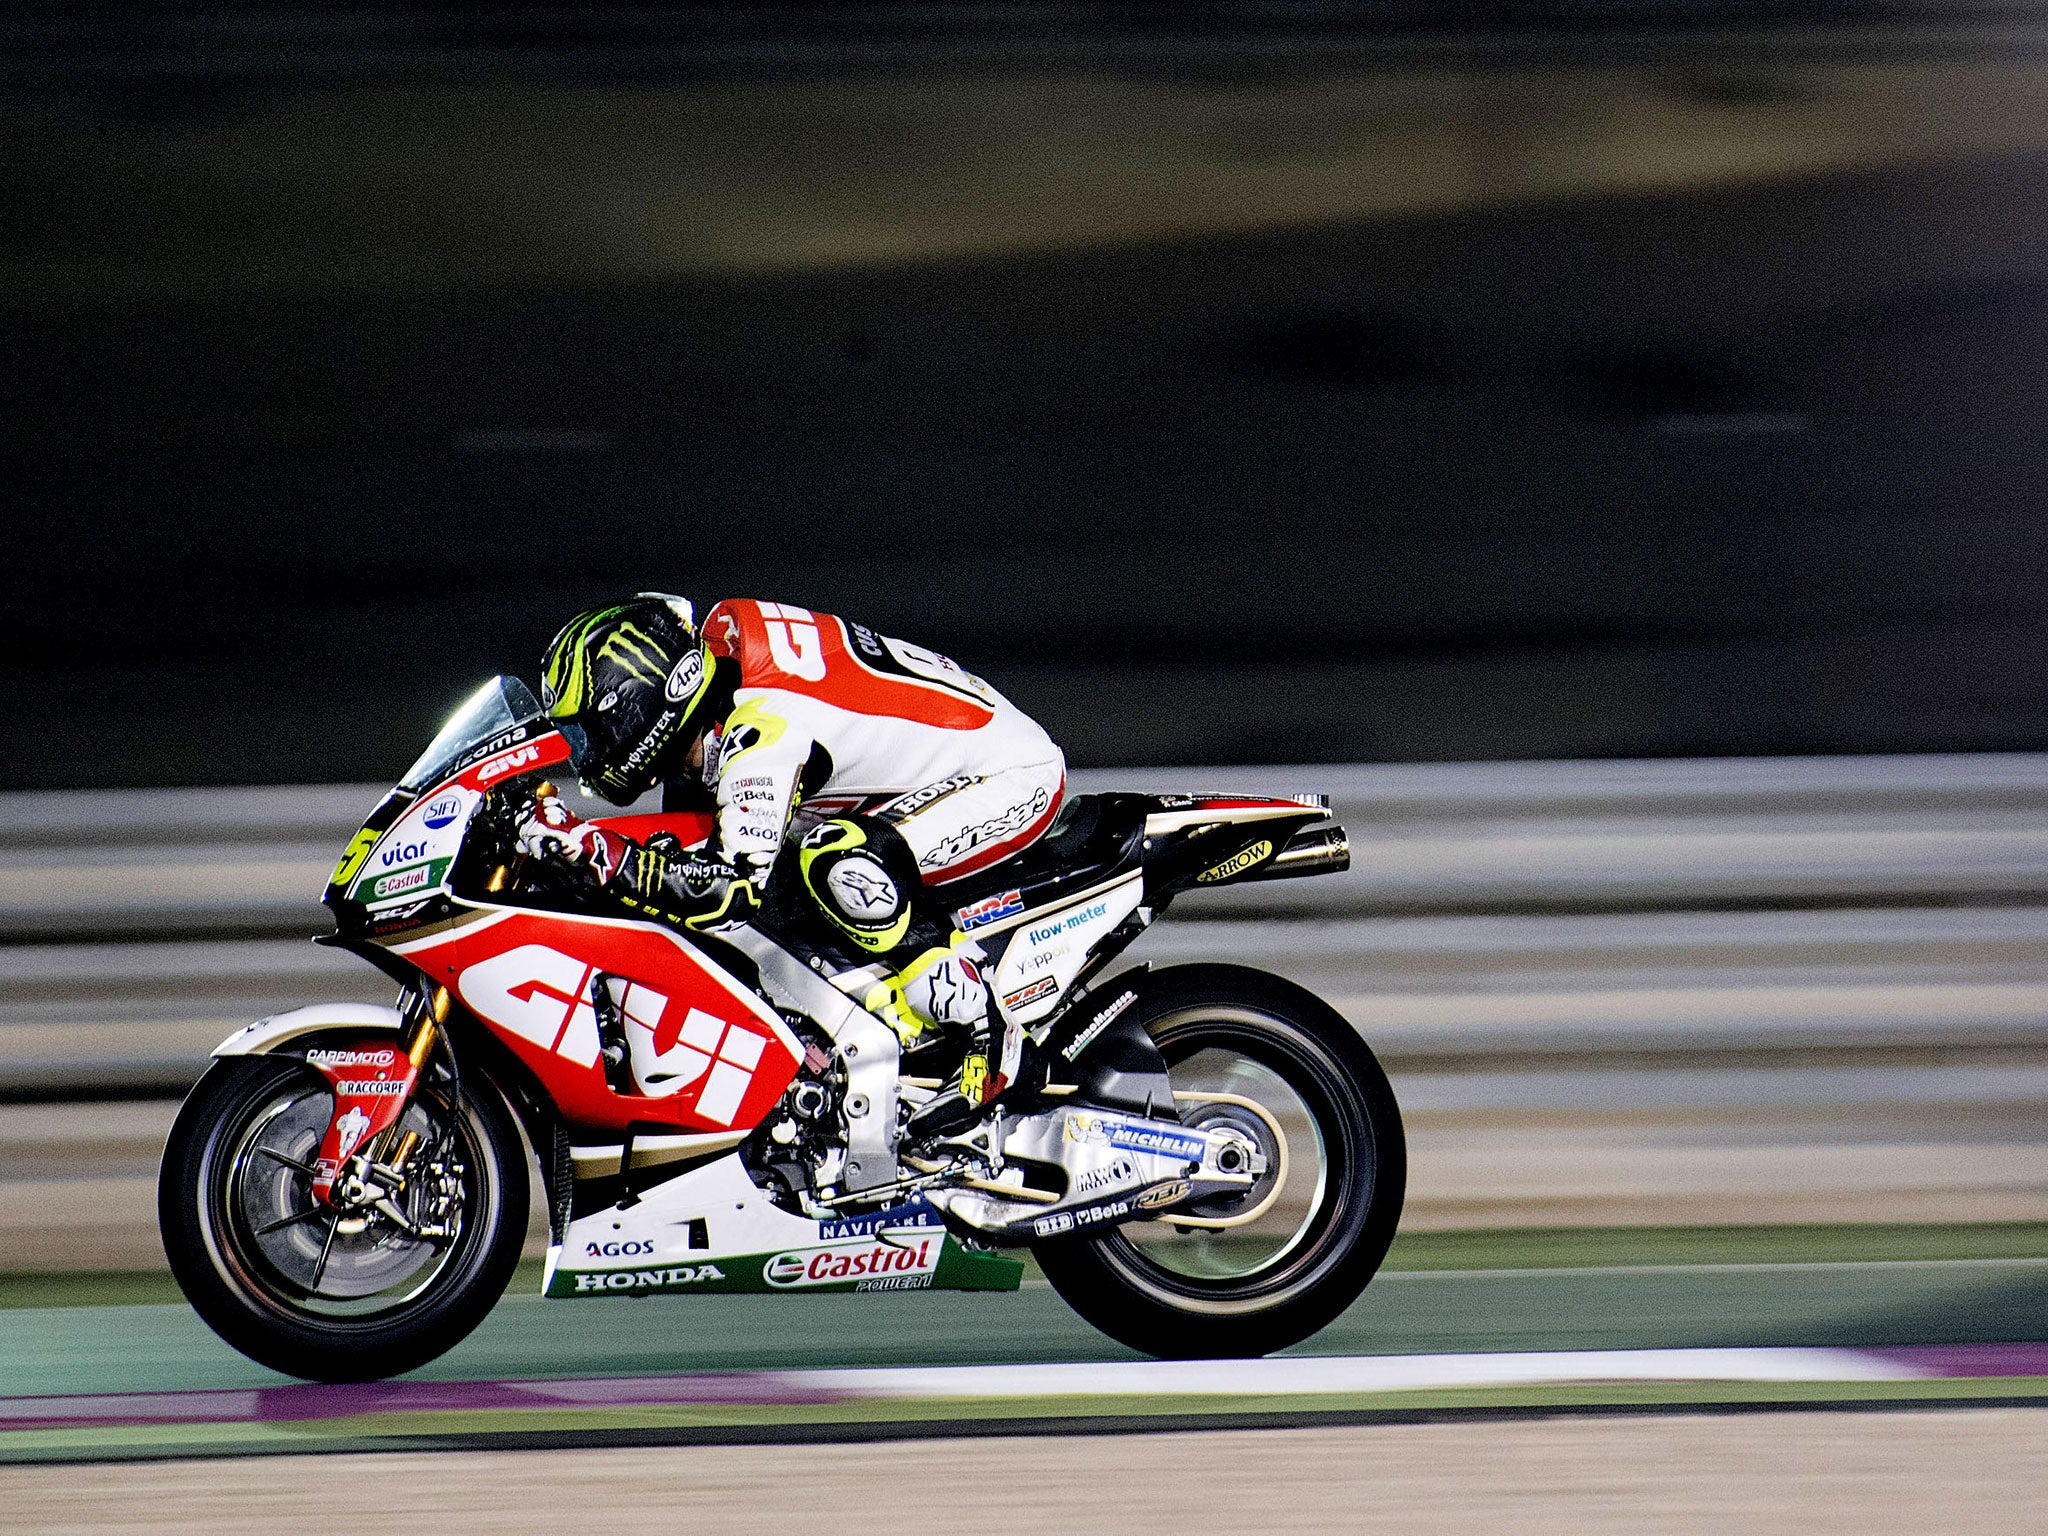 British fans will hope to see Crutchlow on the top step of the podium once again